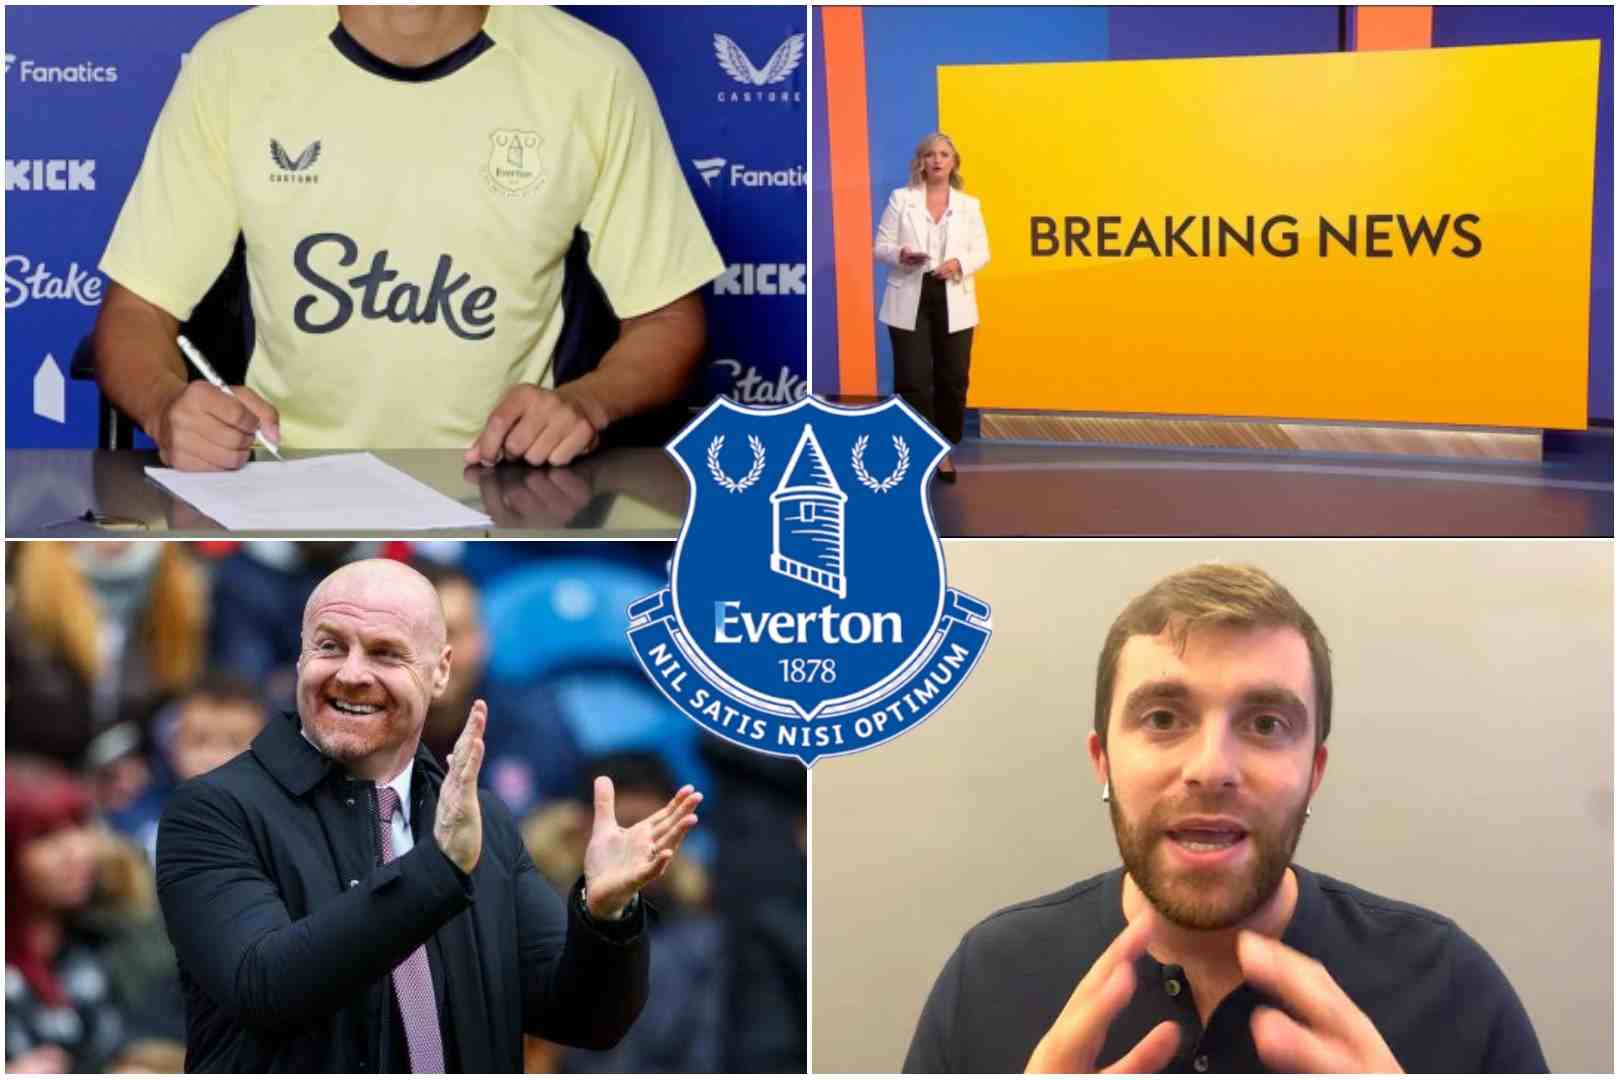 Done Deal – Everton reach agreement to sign “prolific” 21 year old star forward with 15 goals, 10 assists who just proved he’s more reliable than Dominic Calvert-Lewin